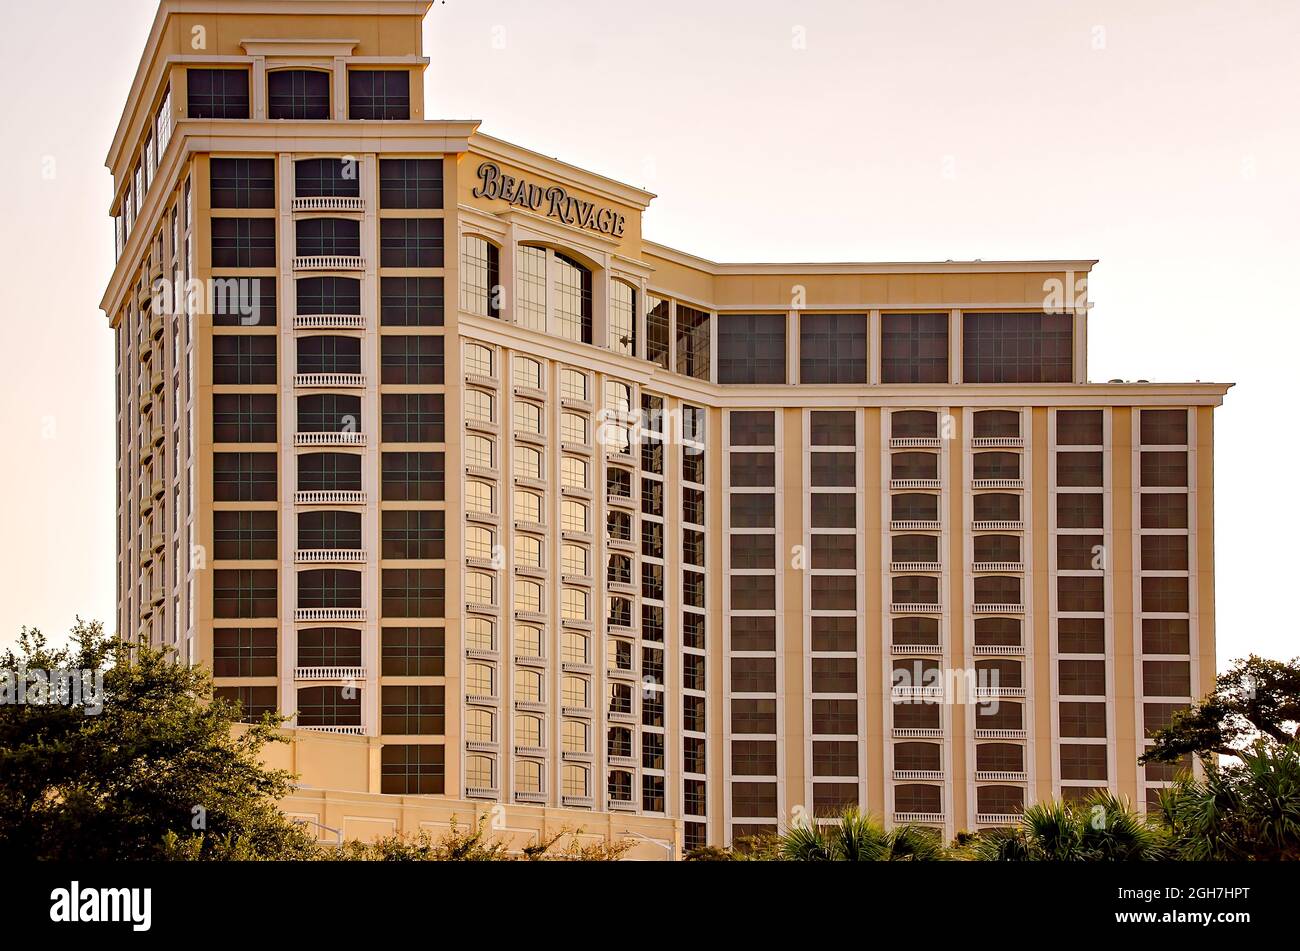 Beau Rivage Casino is pictured, Sept. 5, 2021, in Biloxi, Mississippi. Beau Rivage is owned and operated by MGM Resorts International. Stock Photo